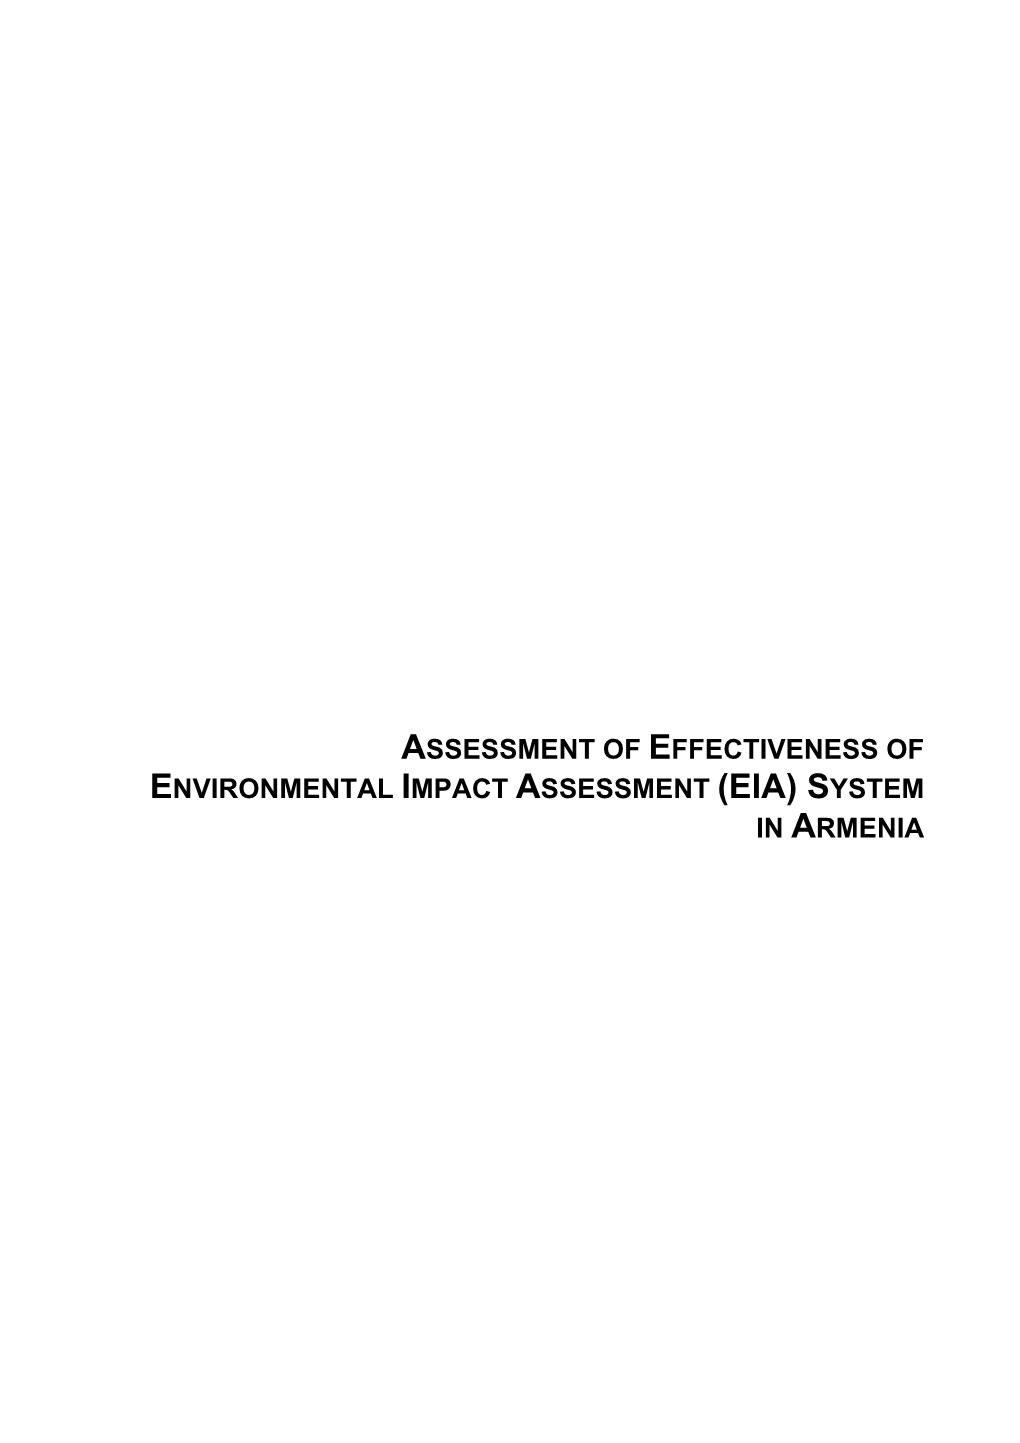 Assessment of Effectiveness of Environmental Impact